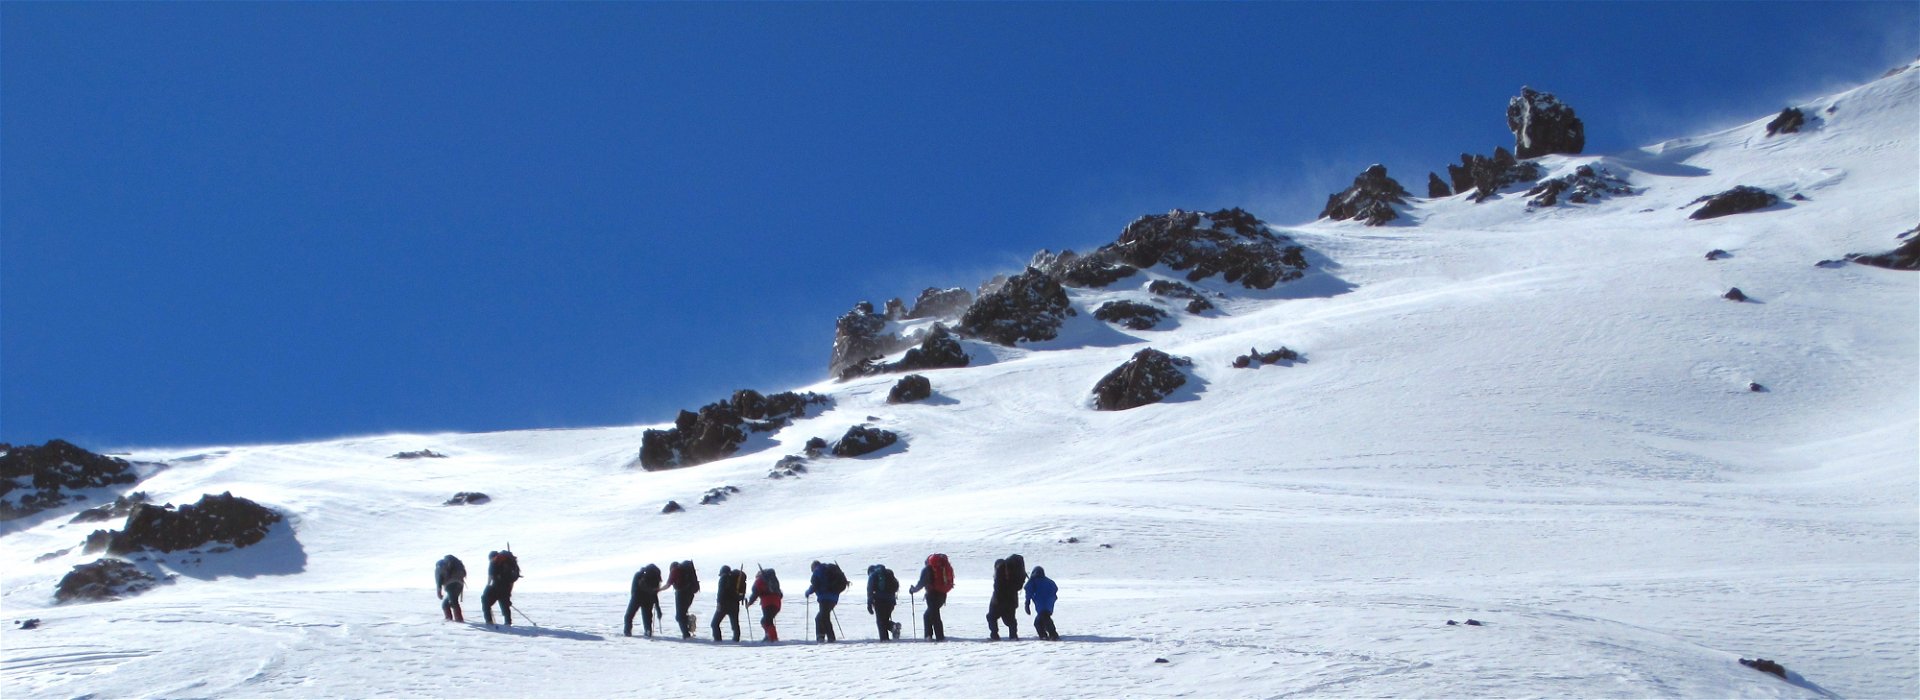 Mount Toubkal in Winter: Are You Sure? 